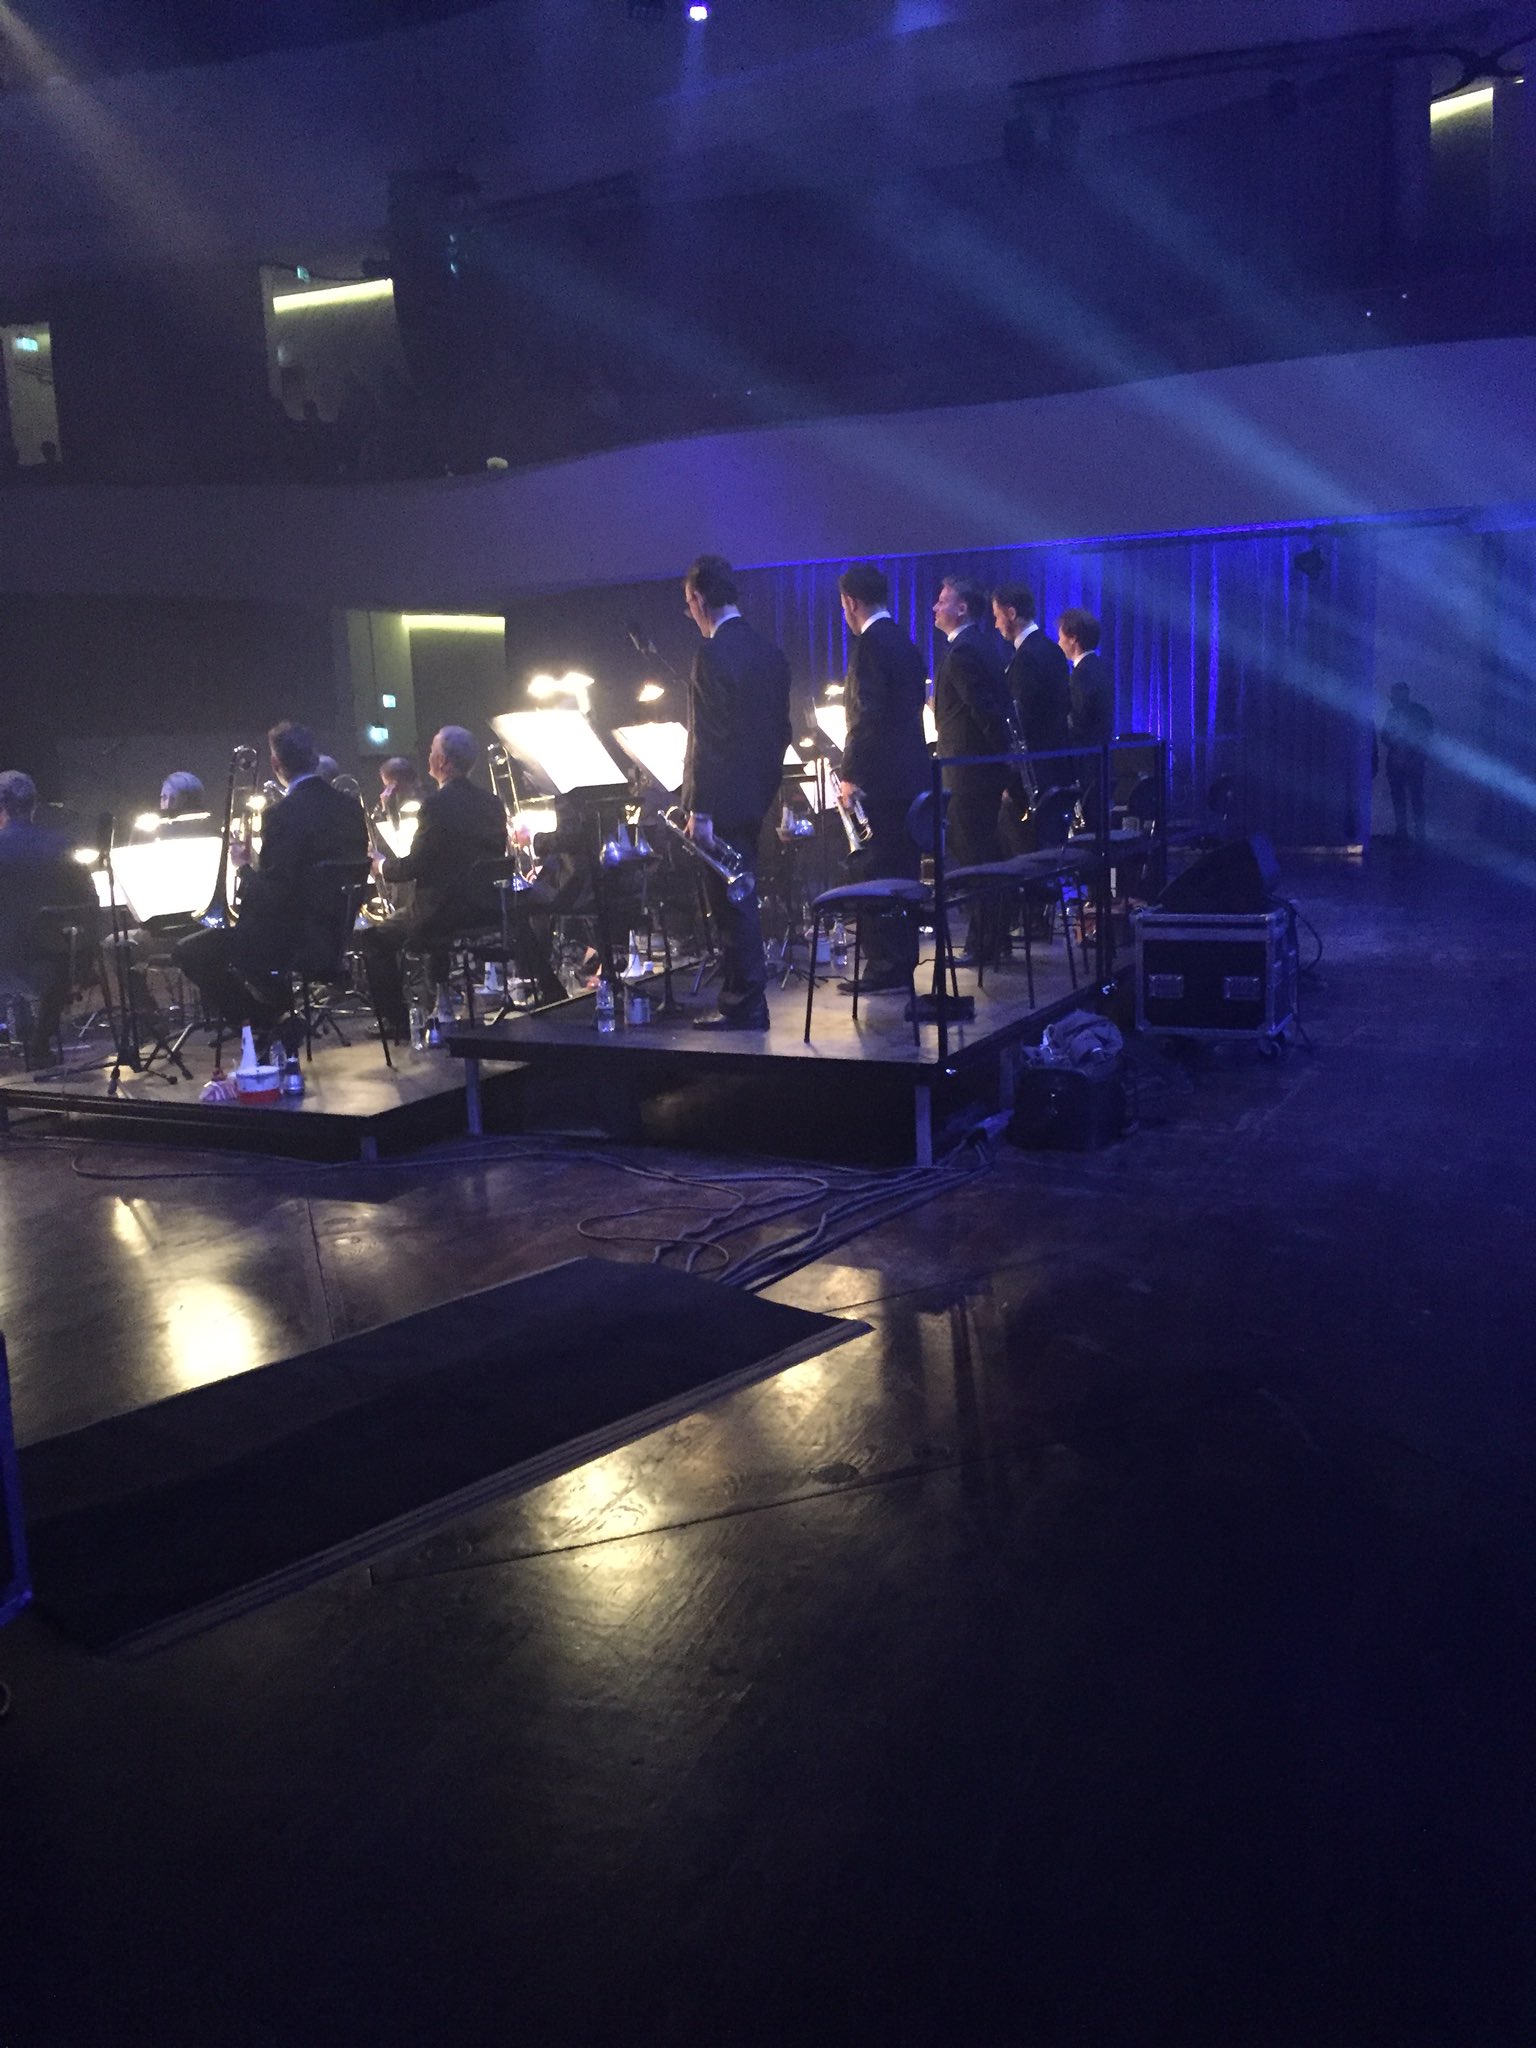 Lang monarki angivet Curtis Stigers on Twitter: "Ready to hit the stage in Aalborg with the  #DanishRadioBigBand &amp; #SinneEeg https://t.co/svWKmJxZKn" / Twitter